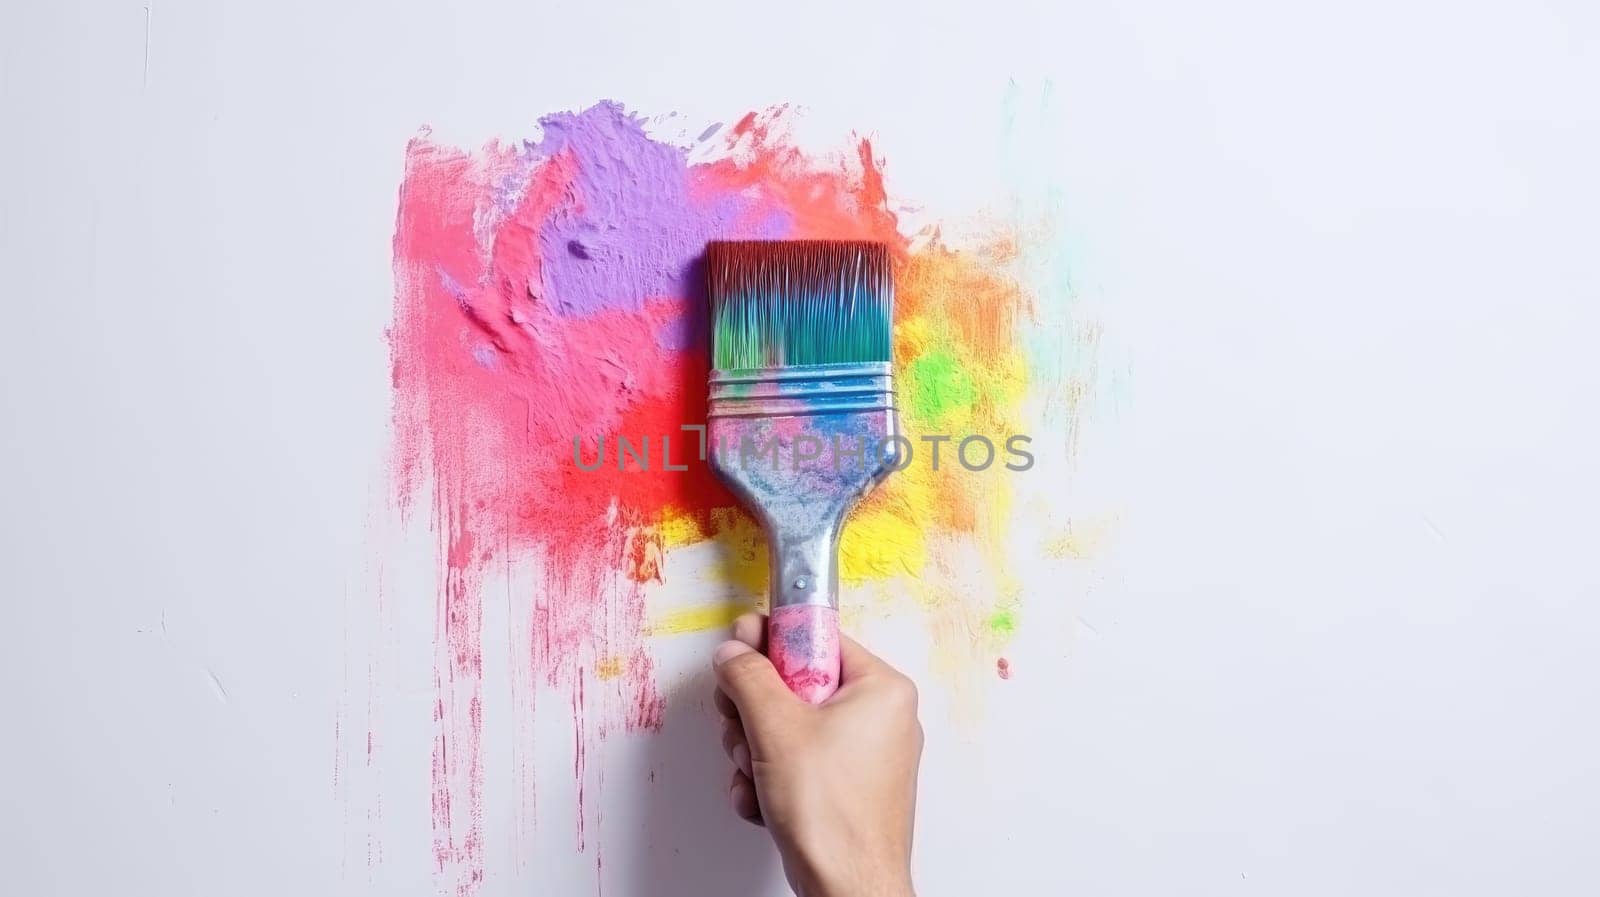 Creative Home Improvement. Hand with Paint Brush and Rainbow Colors - DIY Renovation on White Wall Background. by ViShark